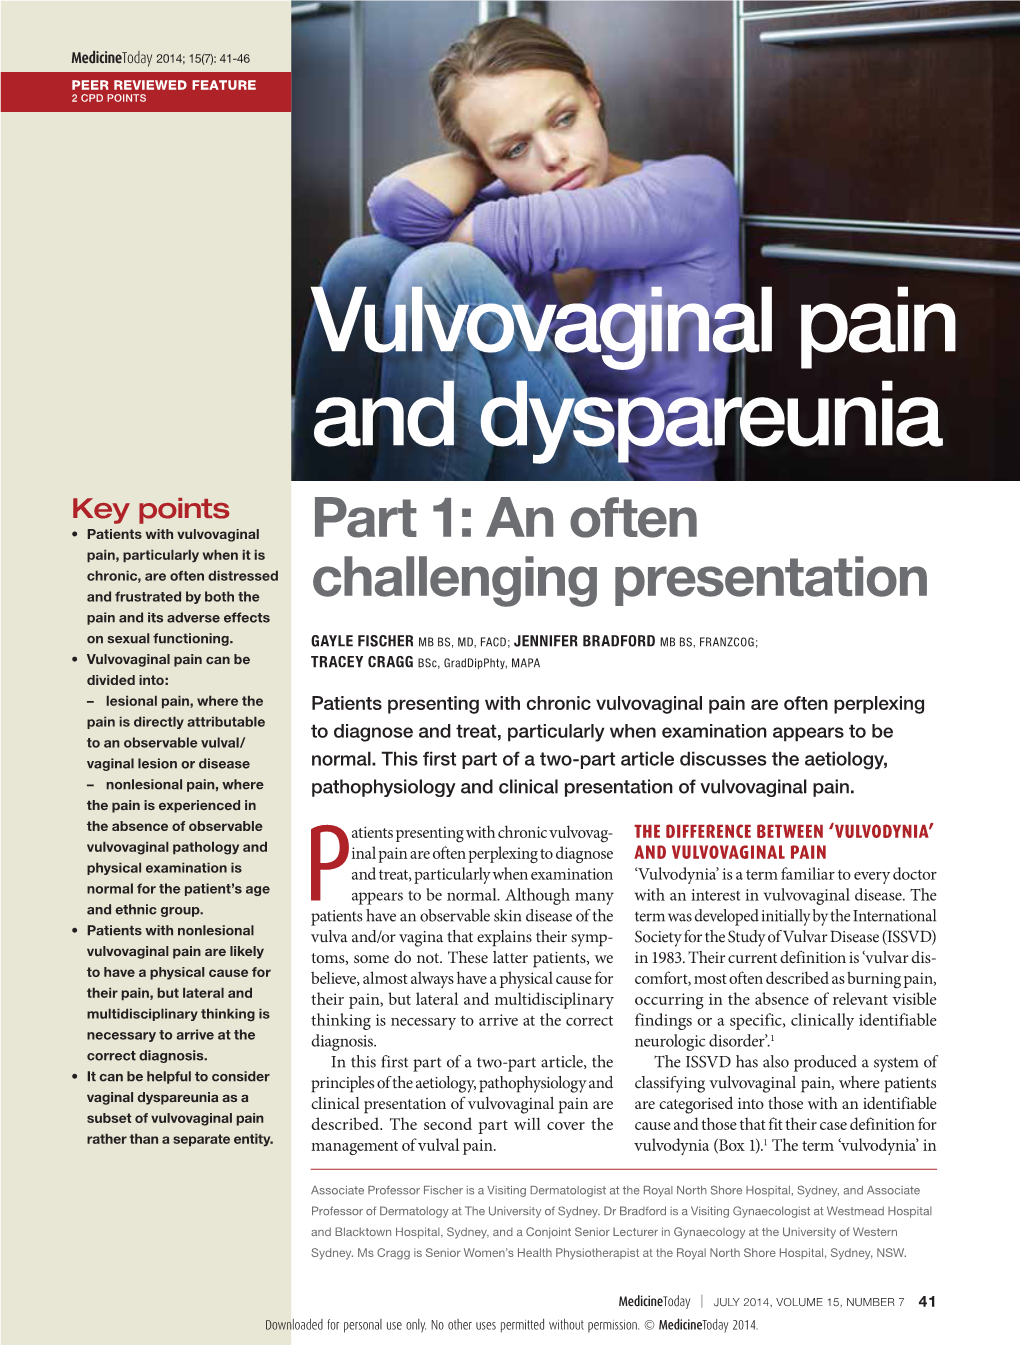 Vulvovaginal Pain and Dyspareunia. Part 1